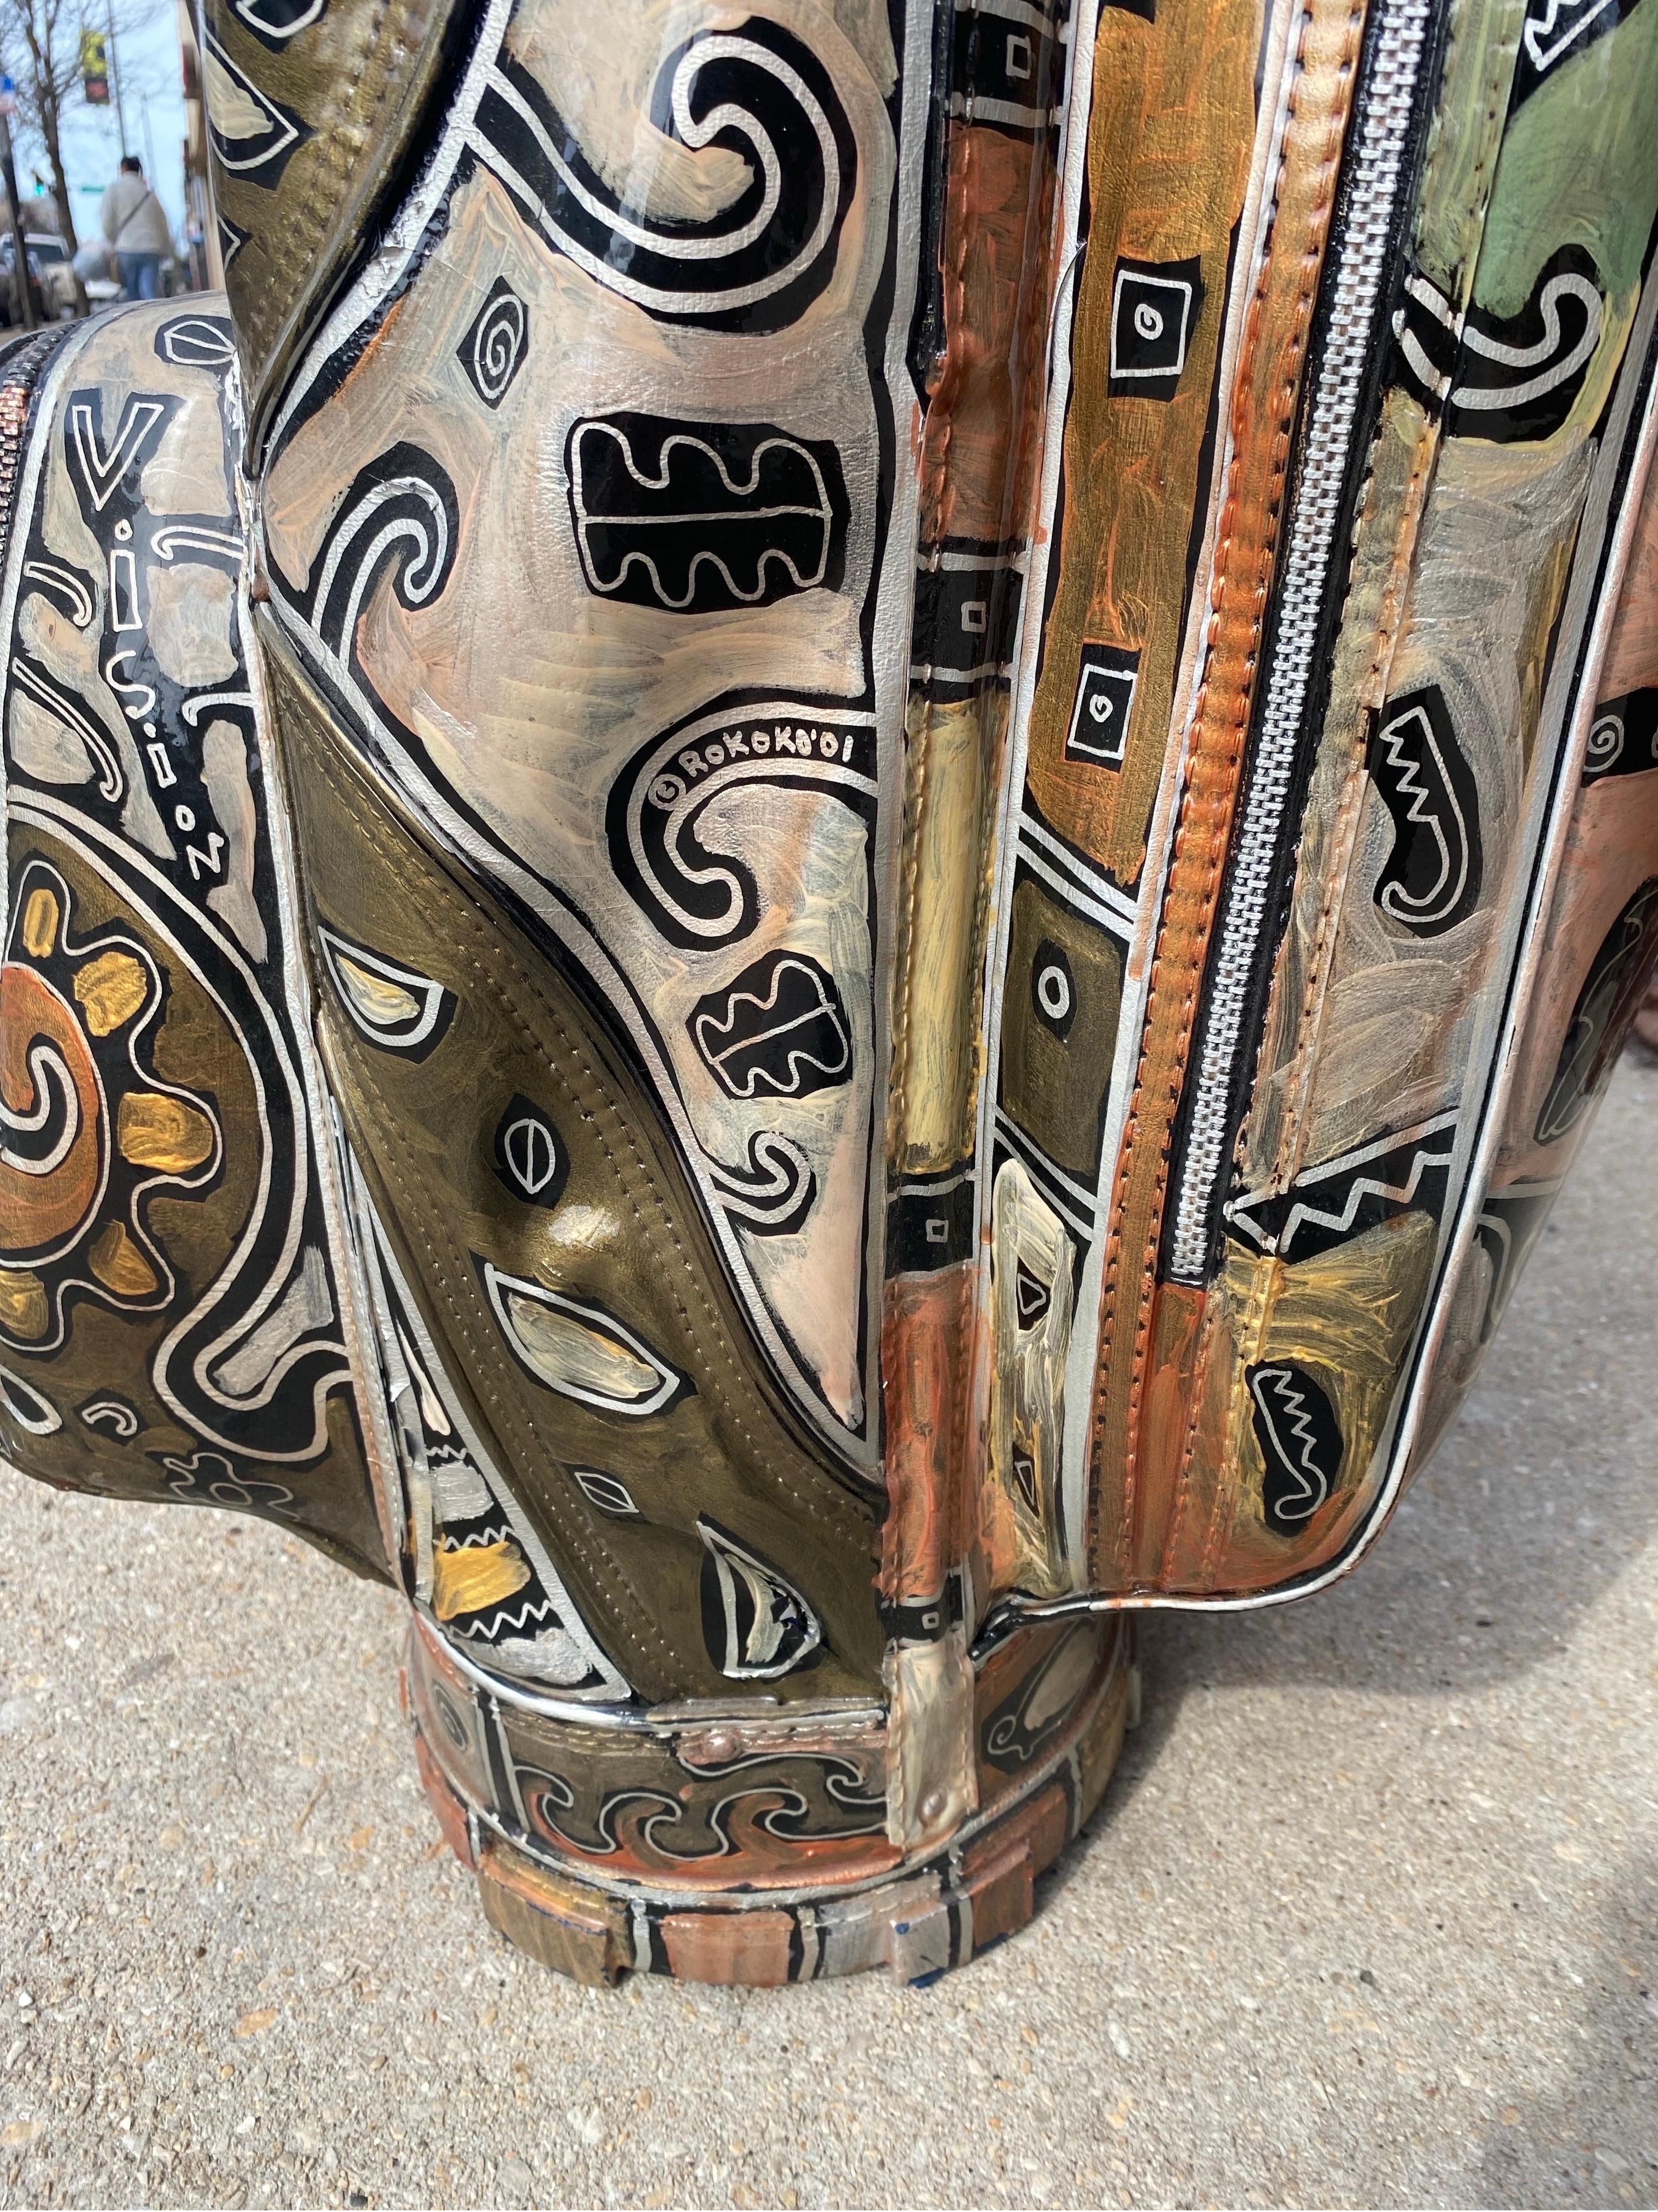 Painted Ajay Golf Bag & Four Painted Golf Clubs signed by Artist, Rokoko

This repurposed Ajay golf bag and five clubs have been completely decorated with abstract and figural drawings, phrases, and color blocks. Many drawings are golf-themed, but